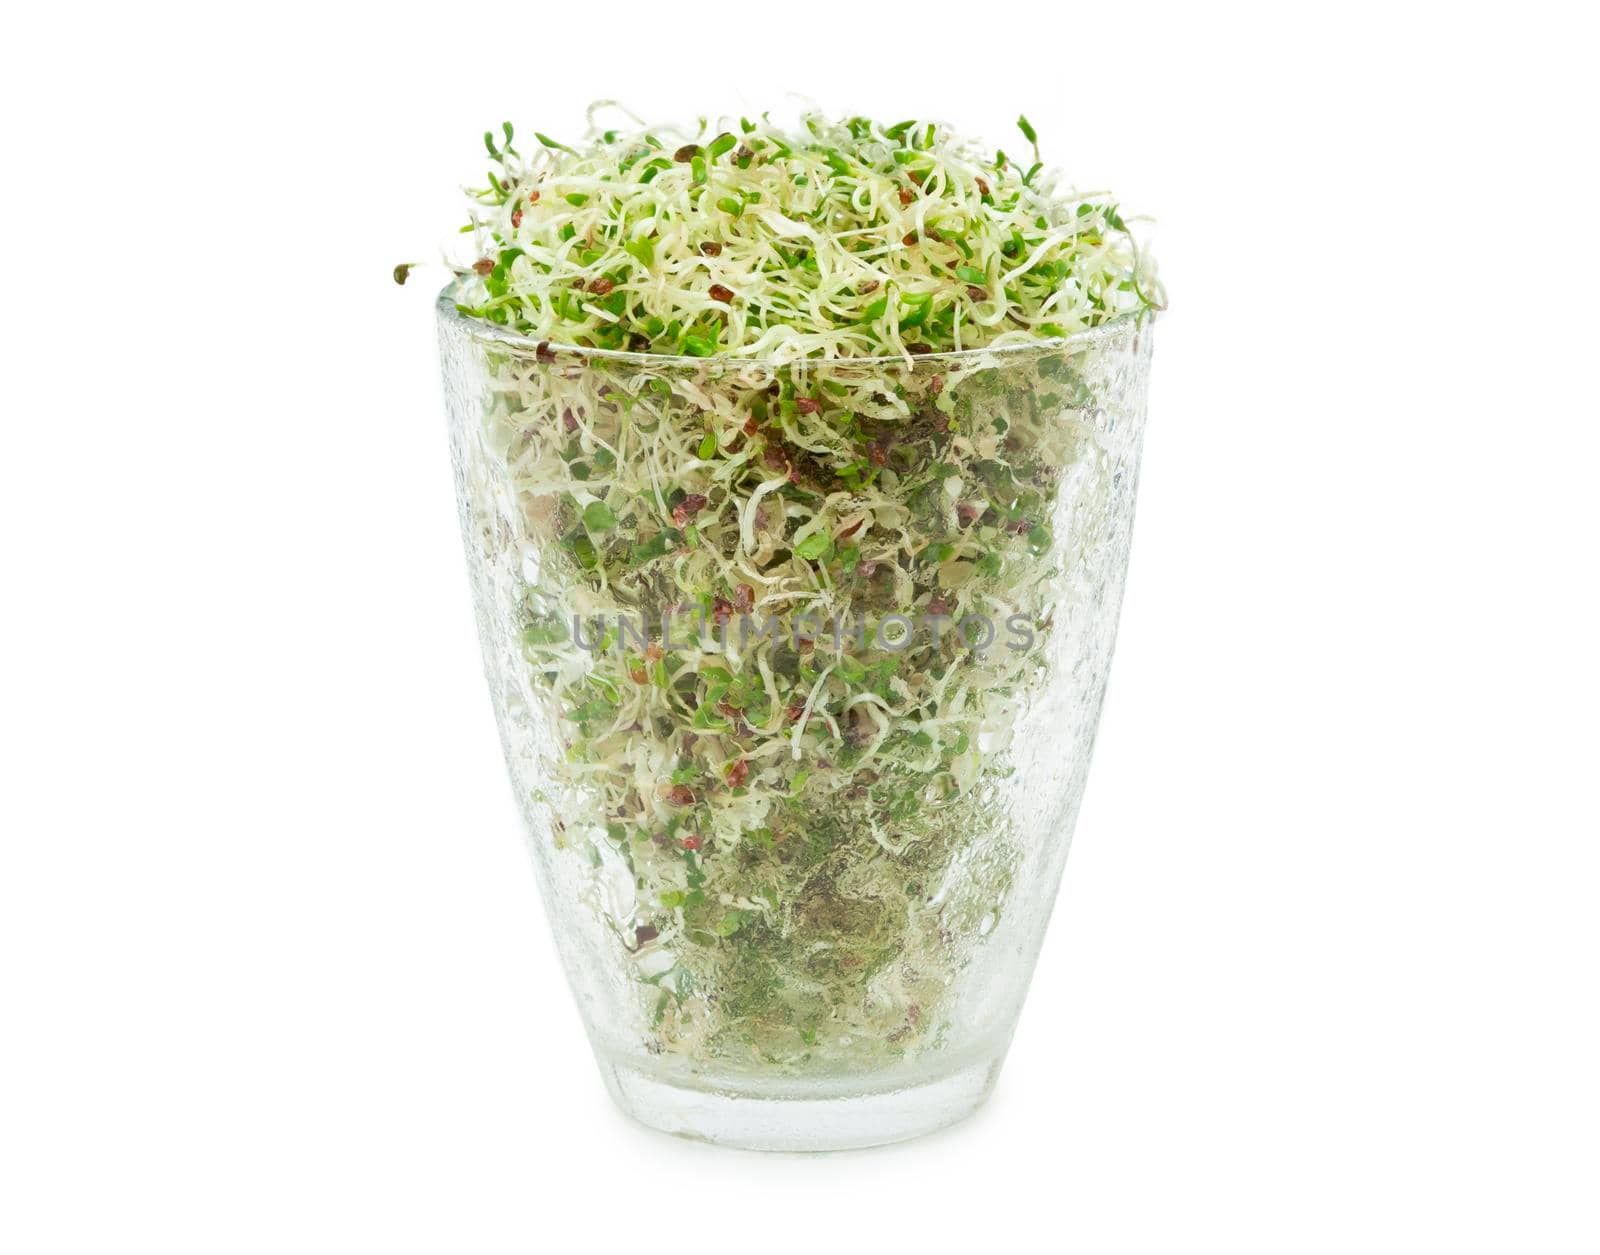 Organic young alfalfa sprouts in a glass on white background. Organic food. Close up with clipping path